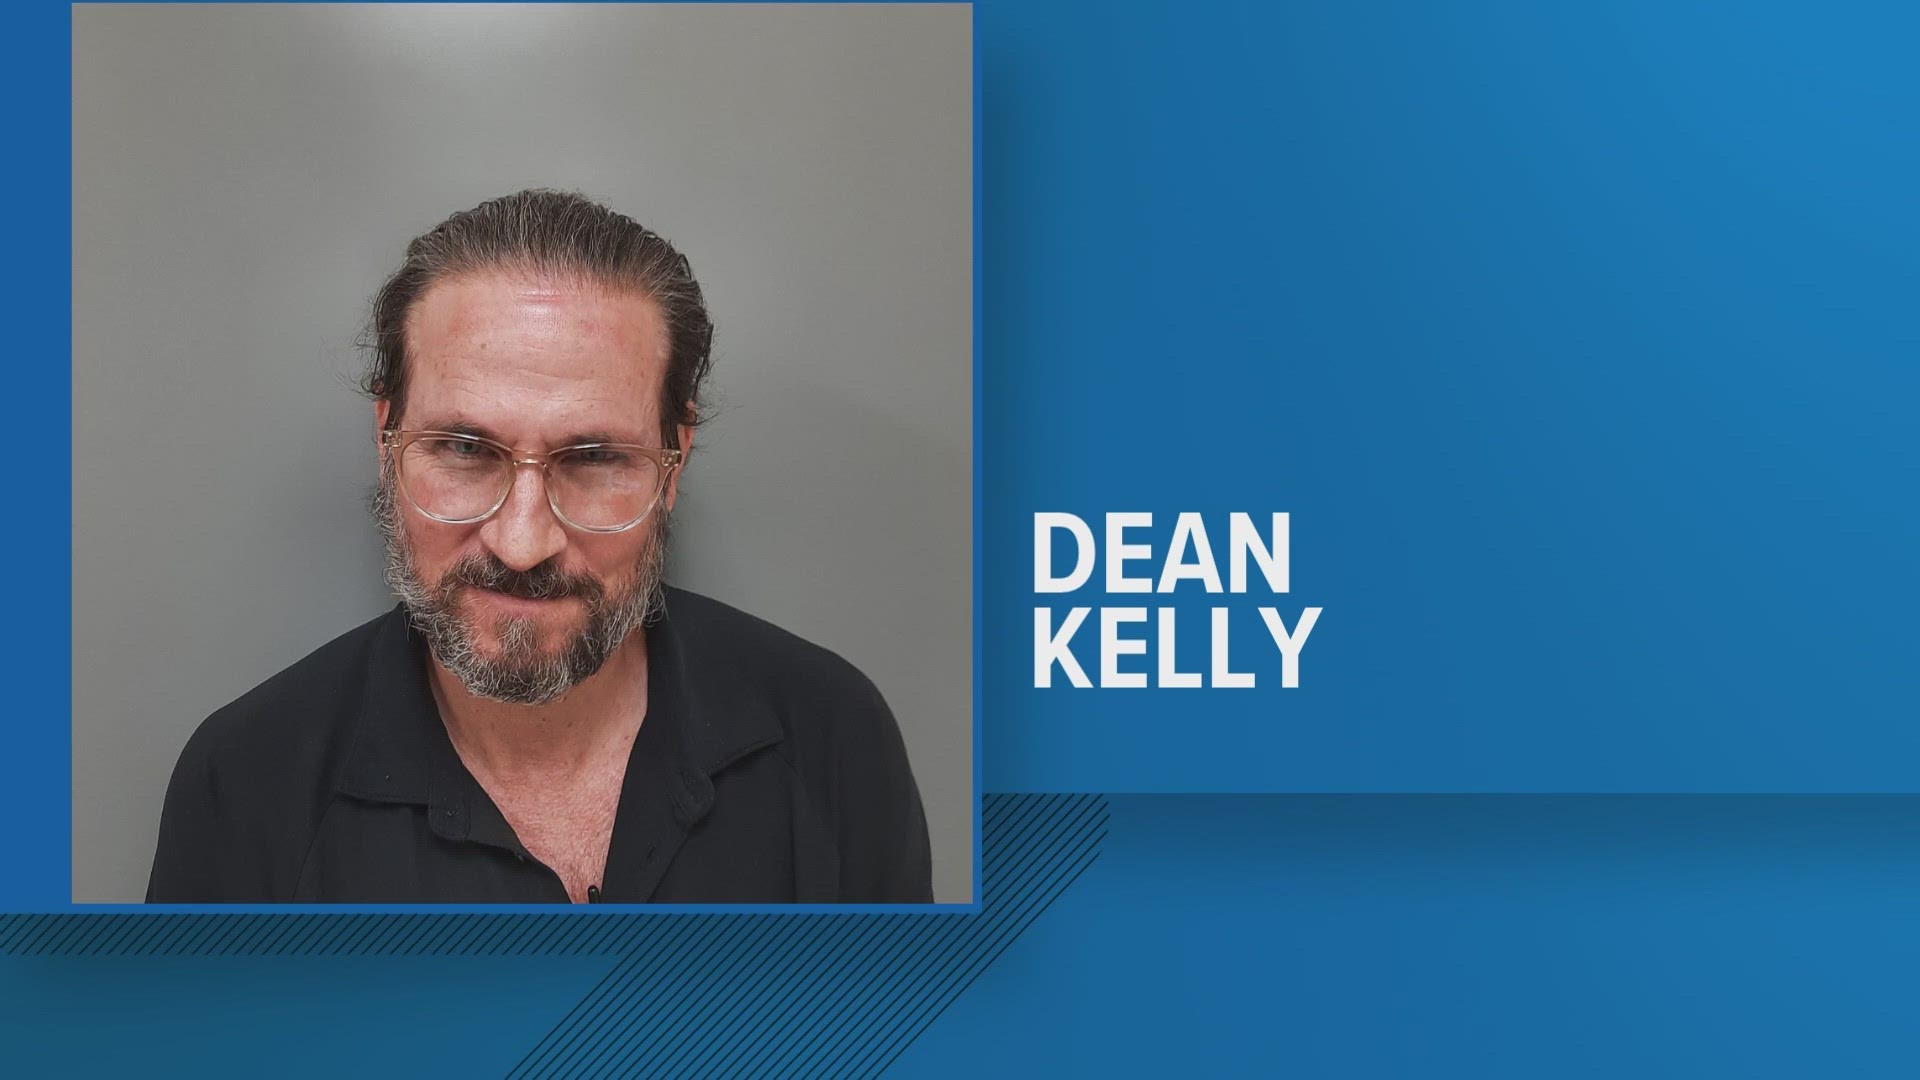 Former model and actor Dean Kelly has been arrested again, this time on attempted third-degree rape and sexual battery.